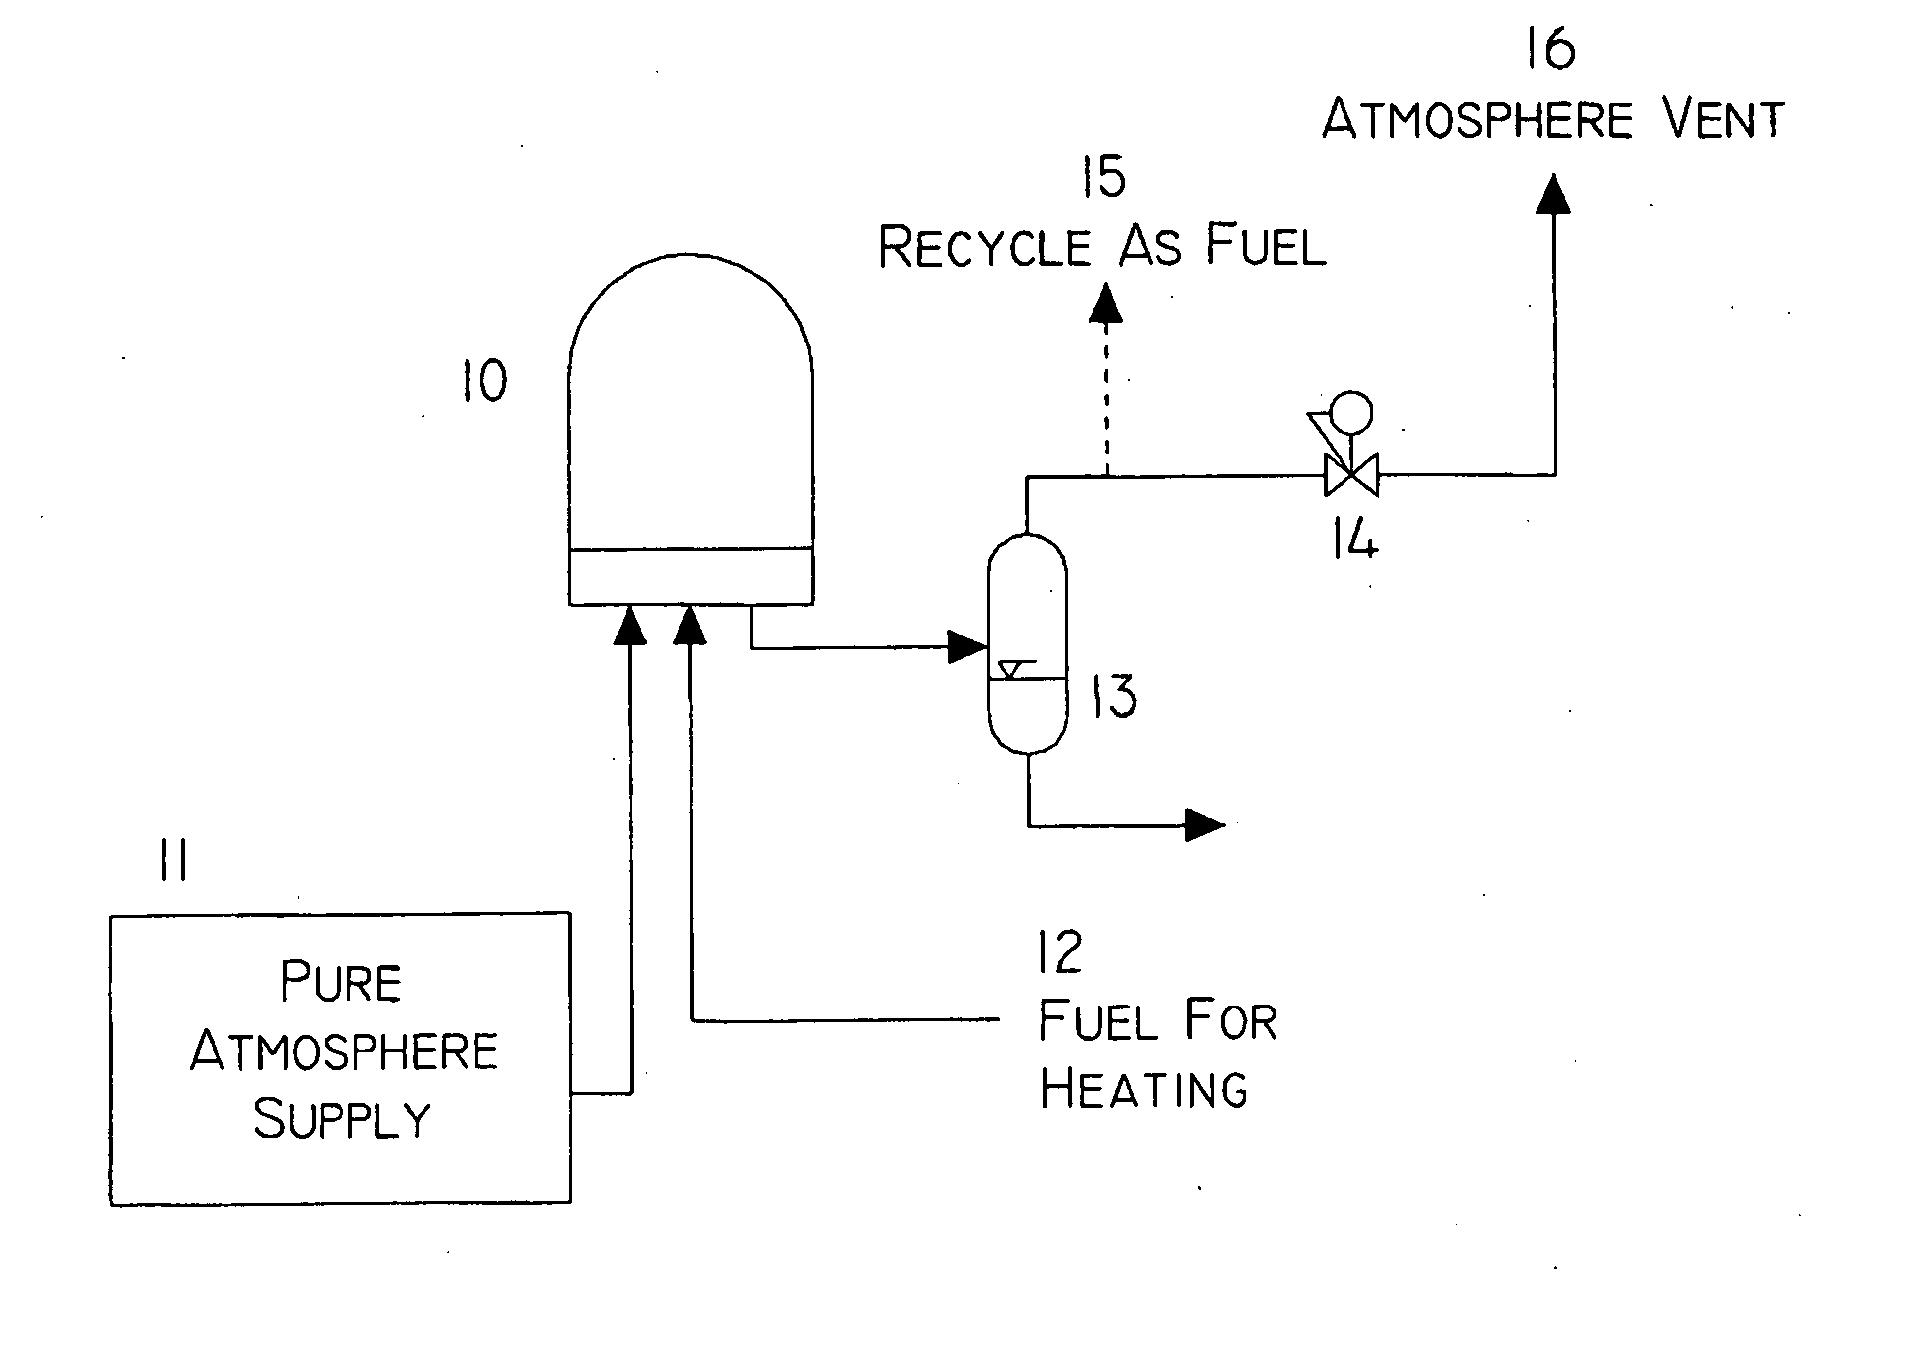 Method and system for atmosphere recycling